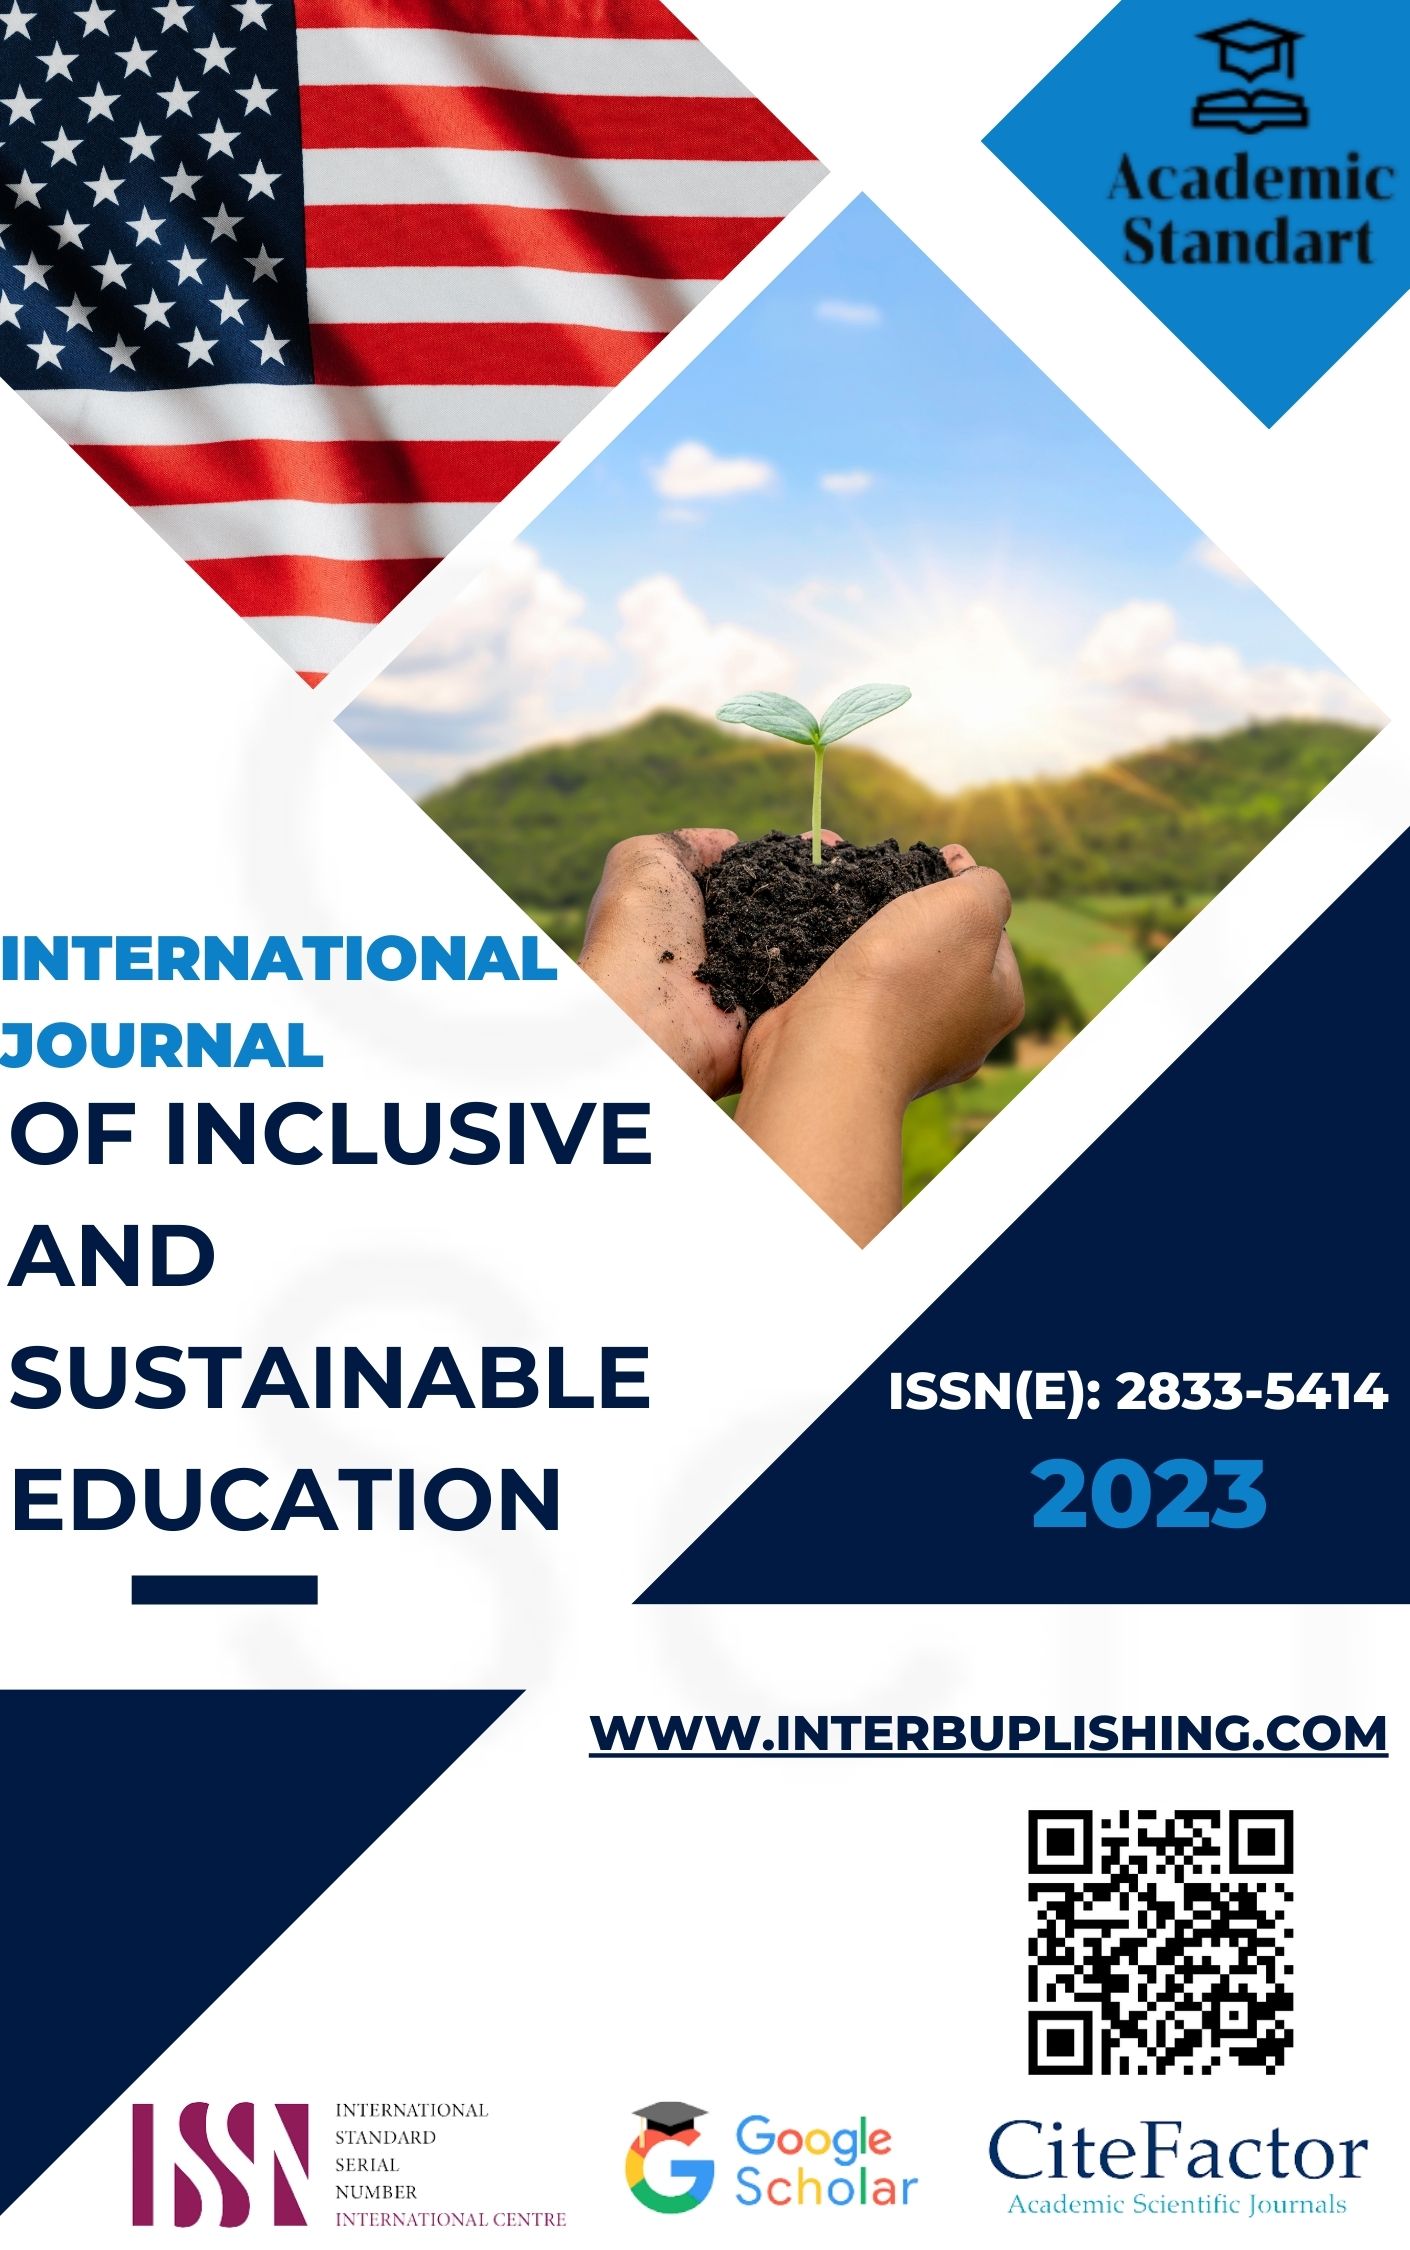 International Journal of Inclusive and Sustainable Education